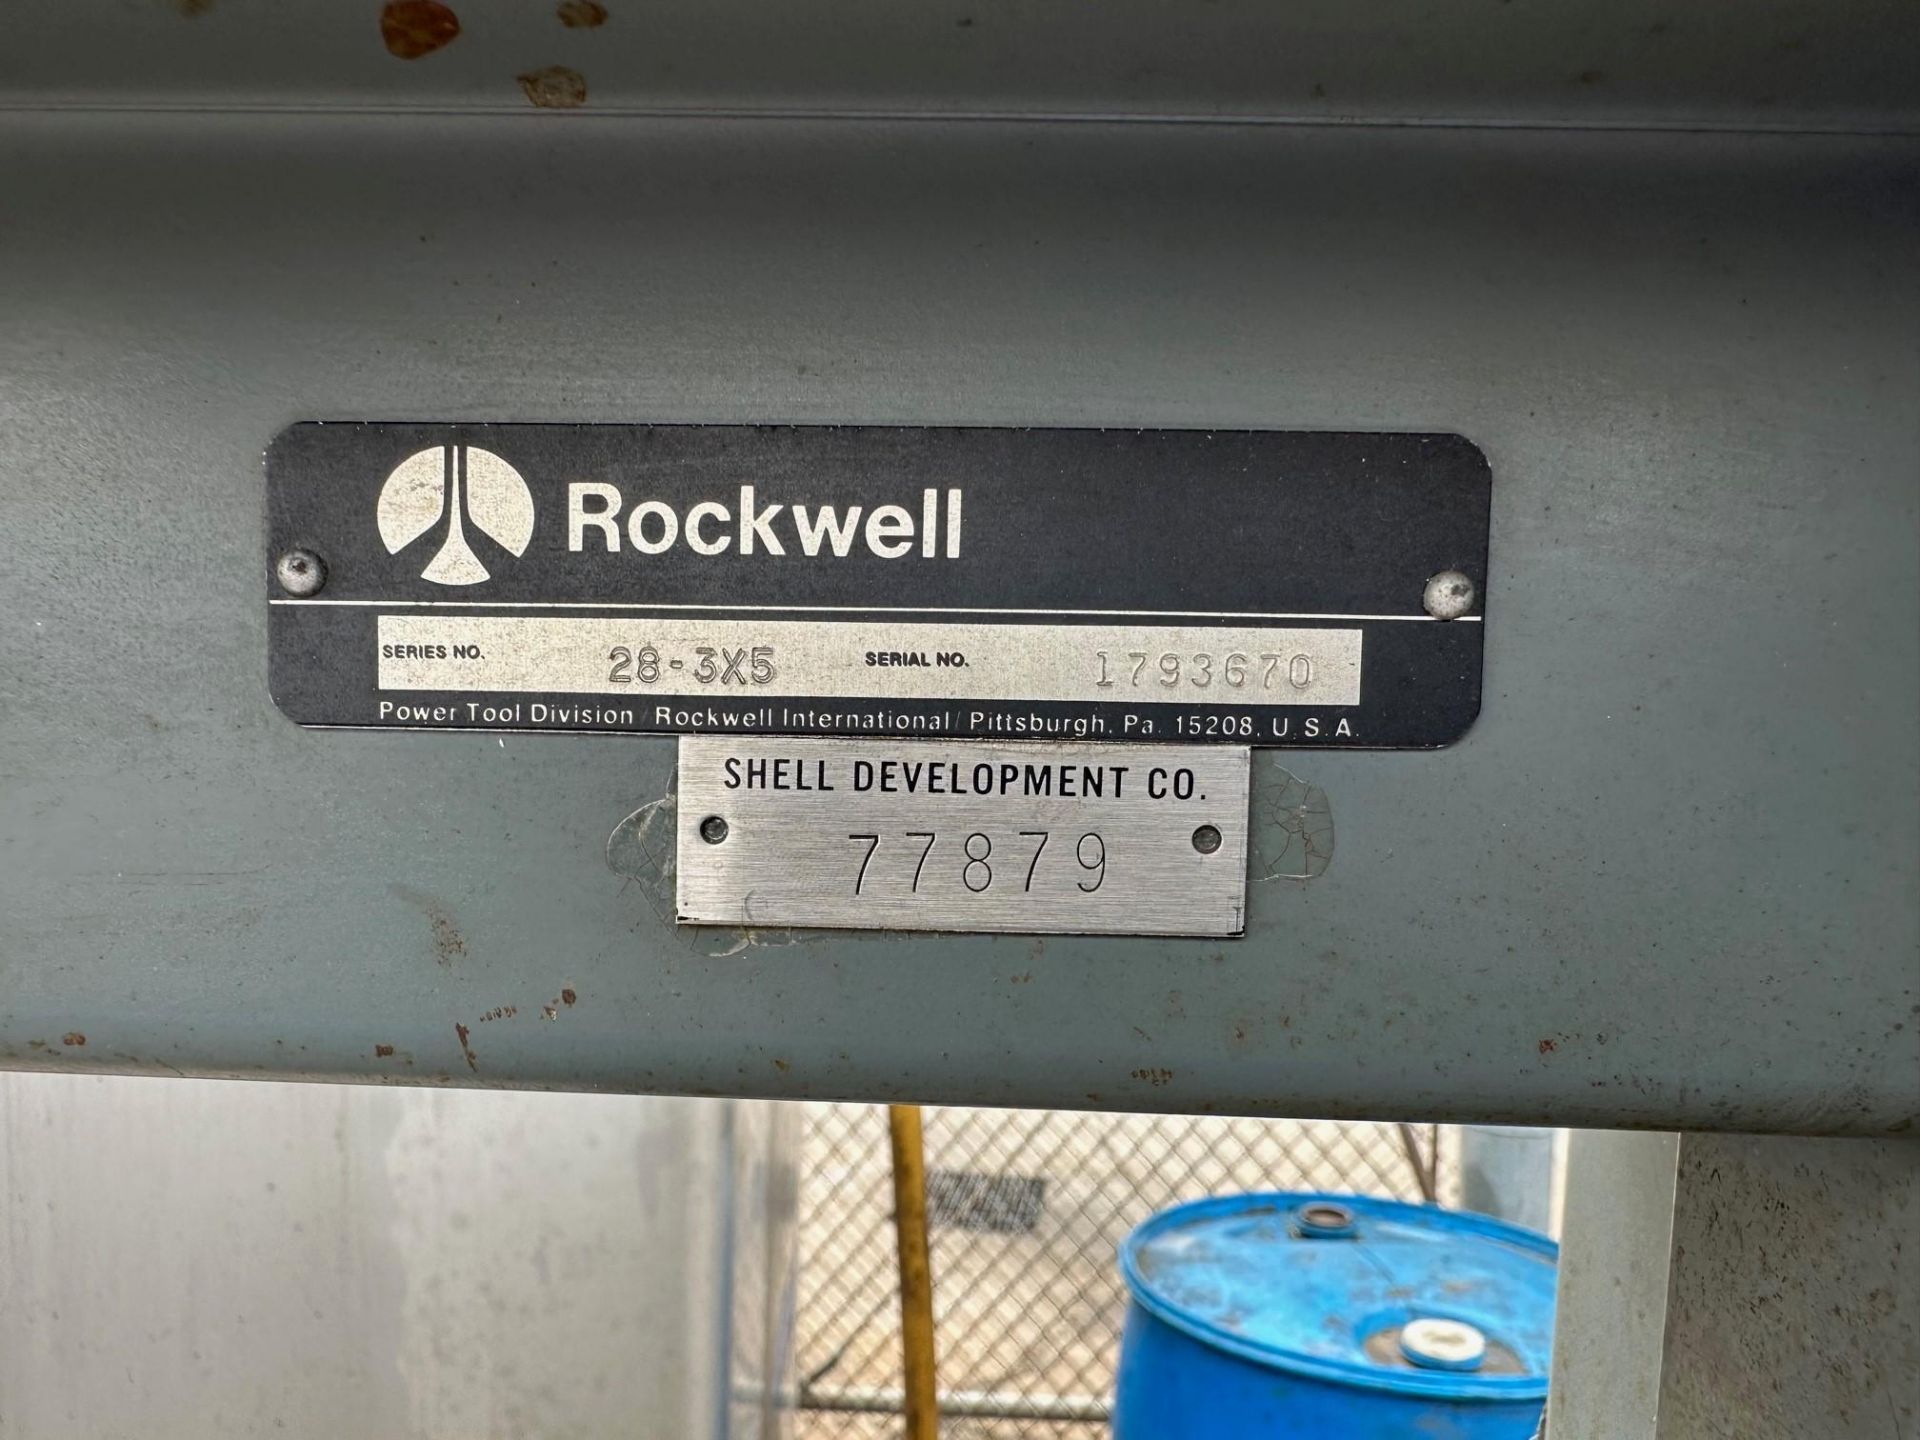 Rockwell Model 20 Vertical Bandsaw with Rockwell Blade Welder - Image 6 of 7